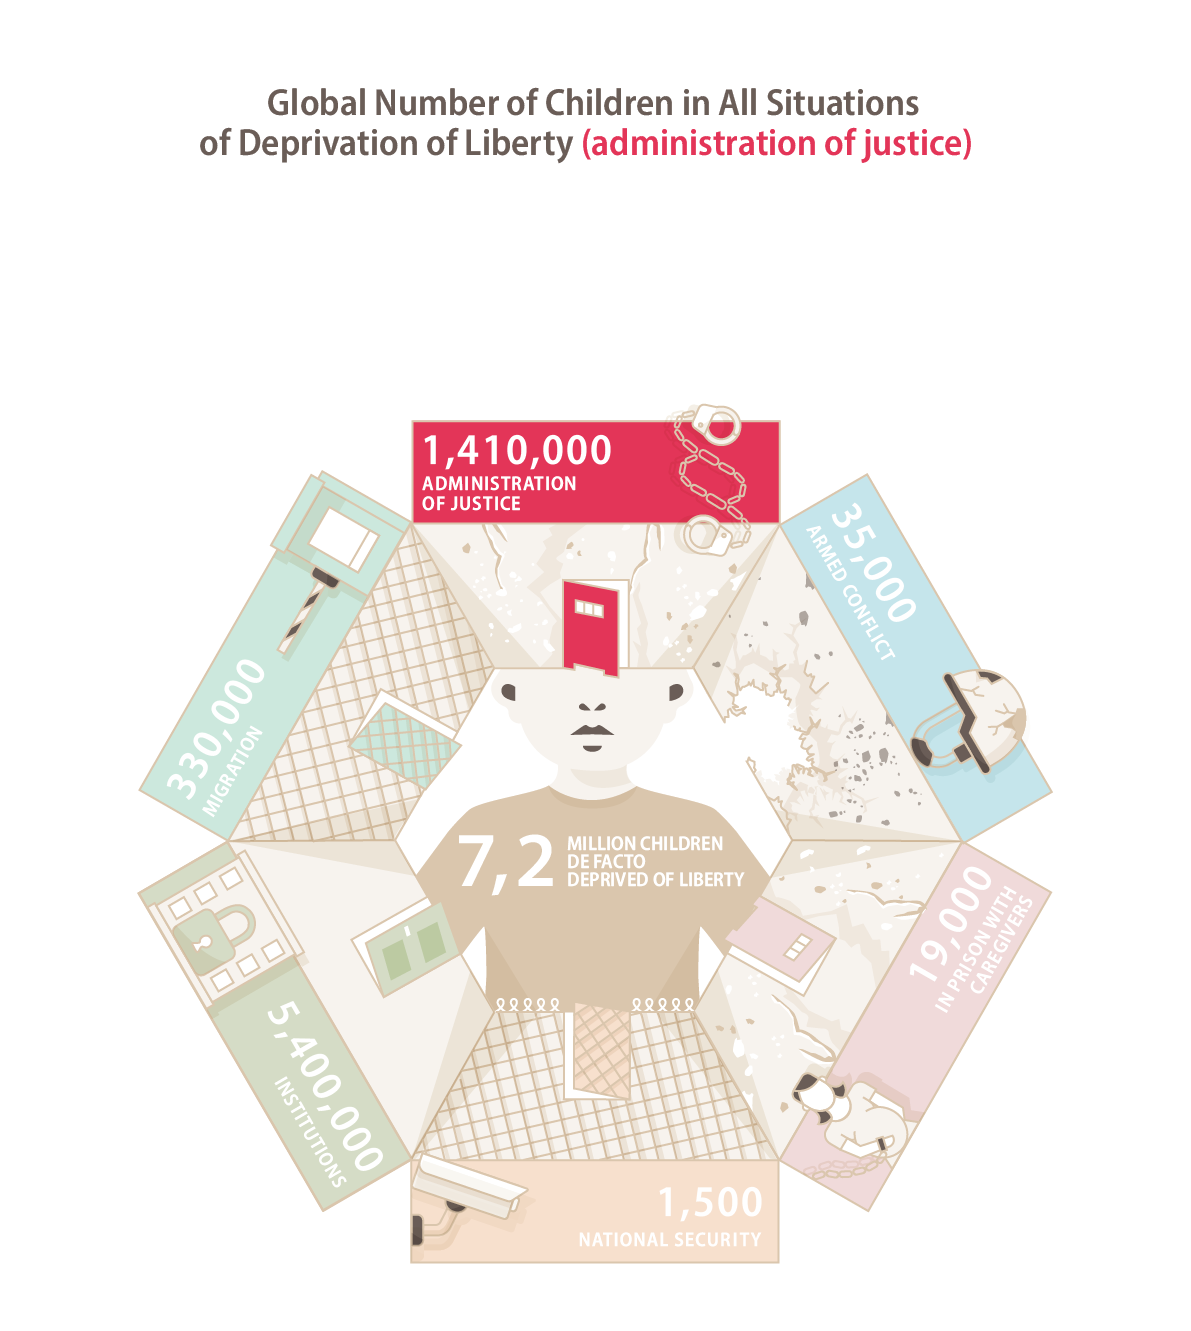 Global Number of Children in All Situations of Deprivation of Liberty (administration of justice )_29_03